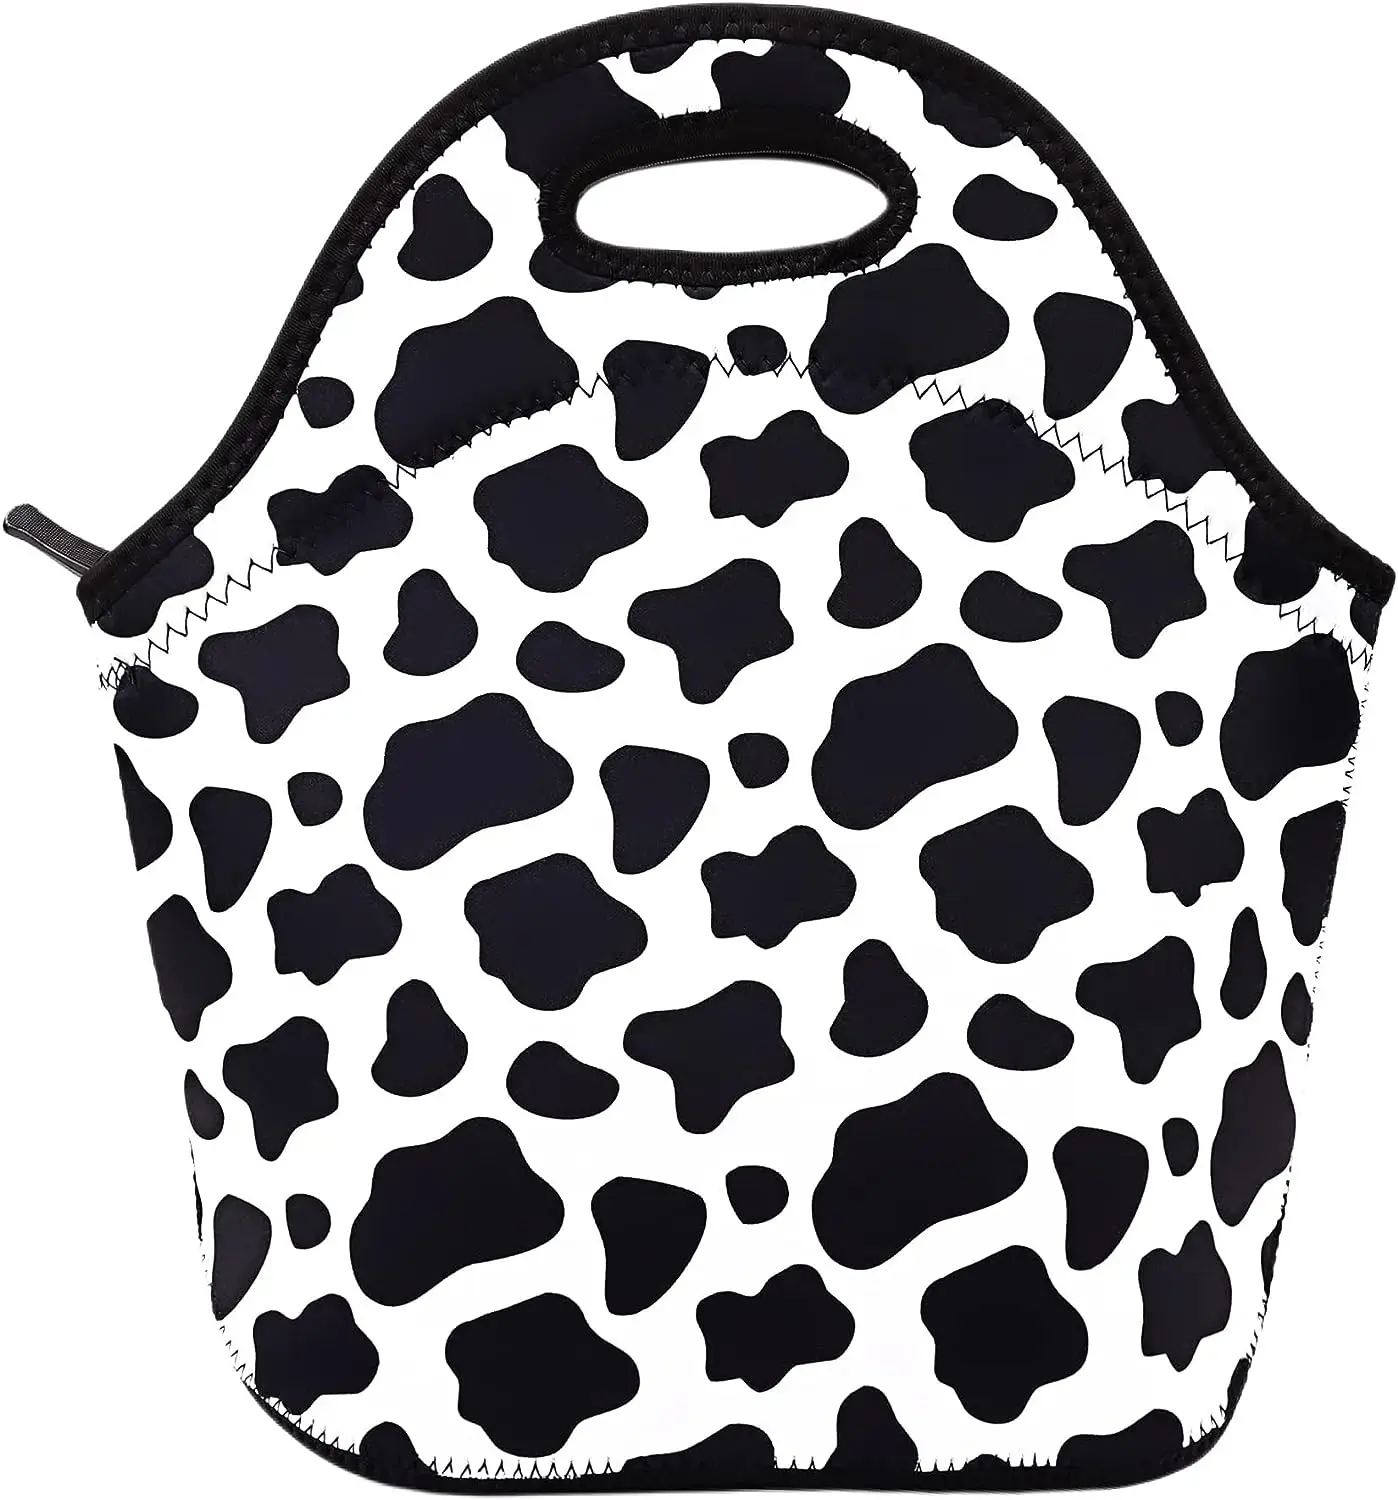 

Neoprene Lunch Bag Insulated Lunch Box Tote for Women Men Adult Teens (Cow Print)